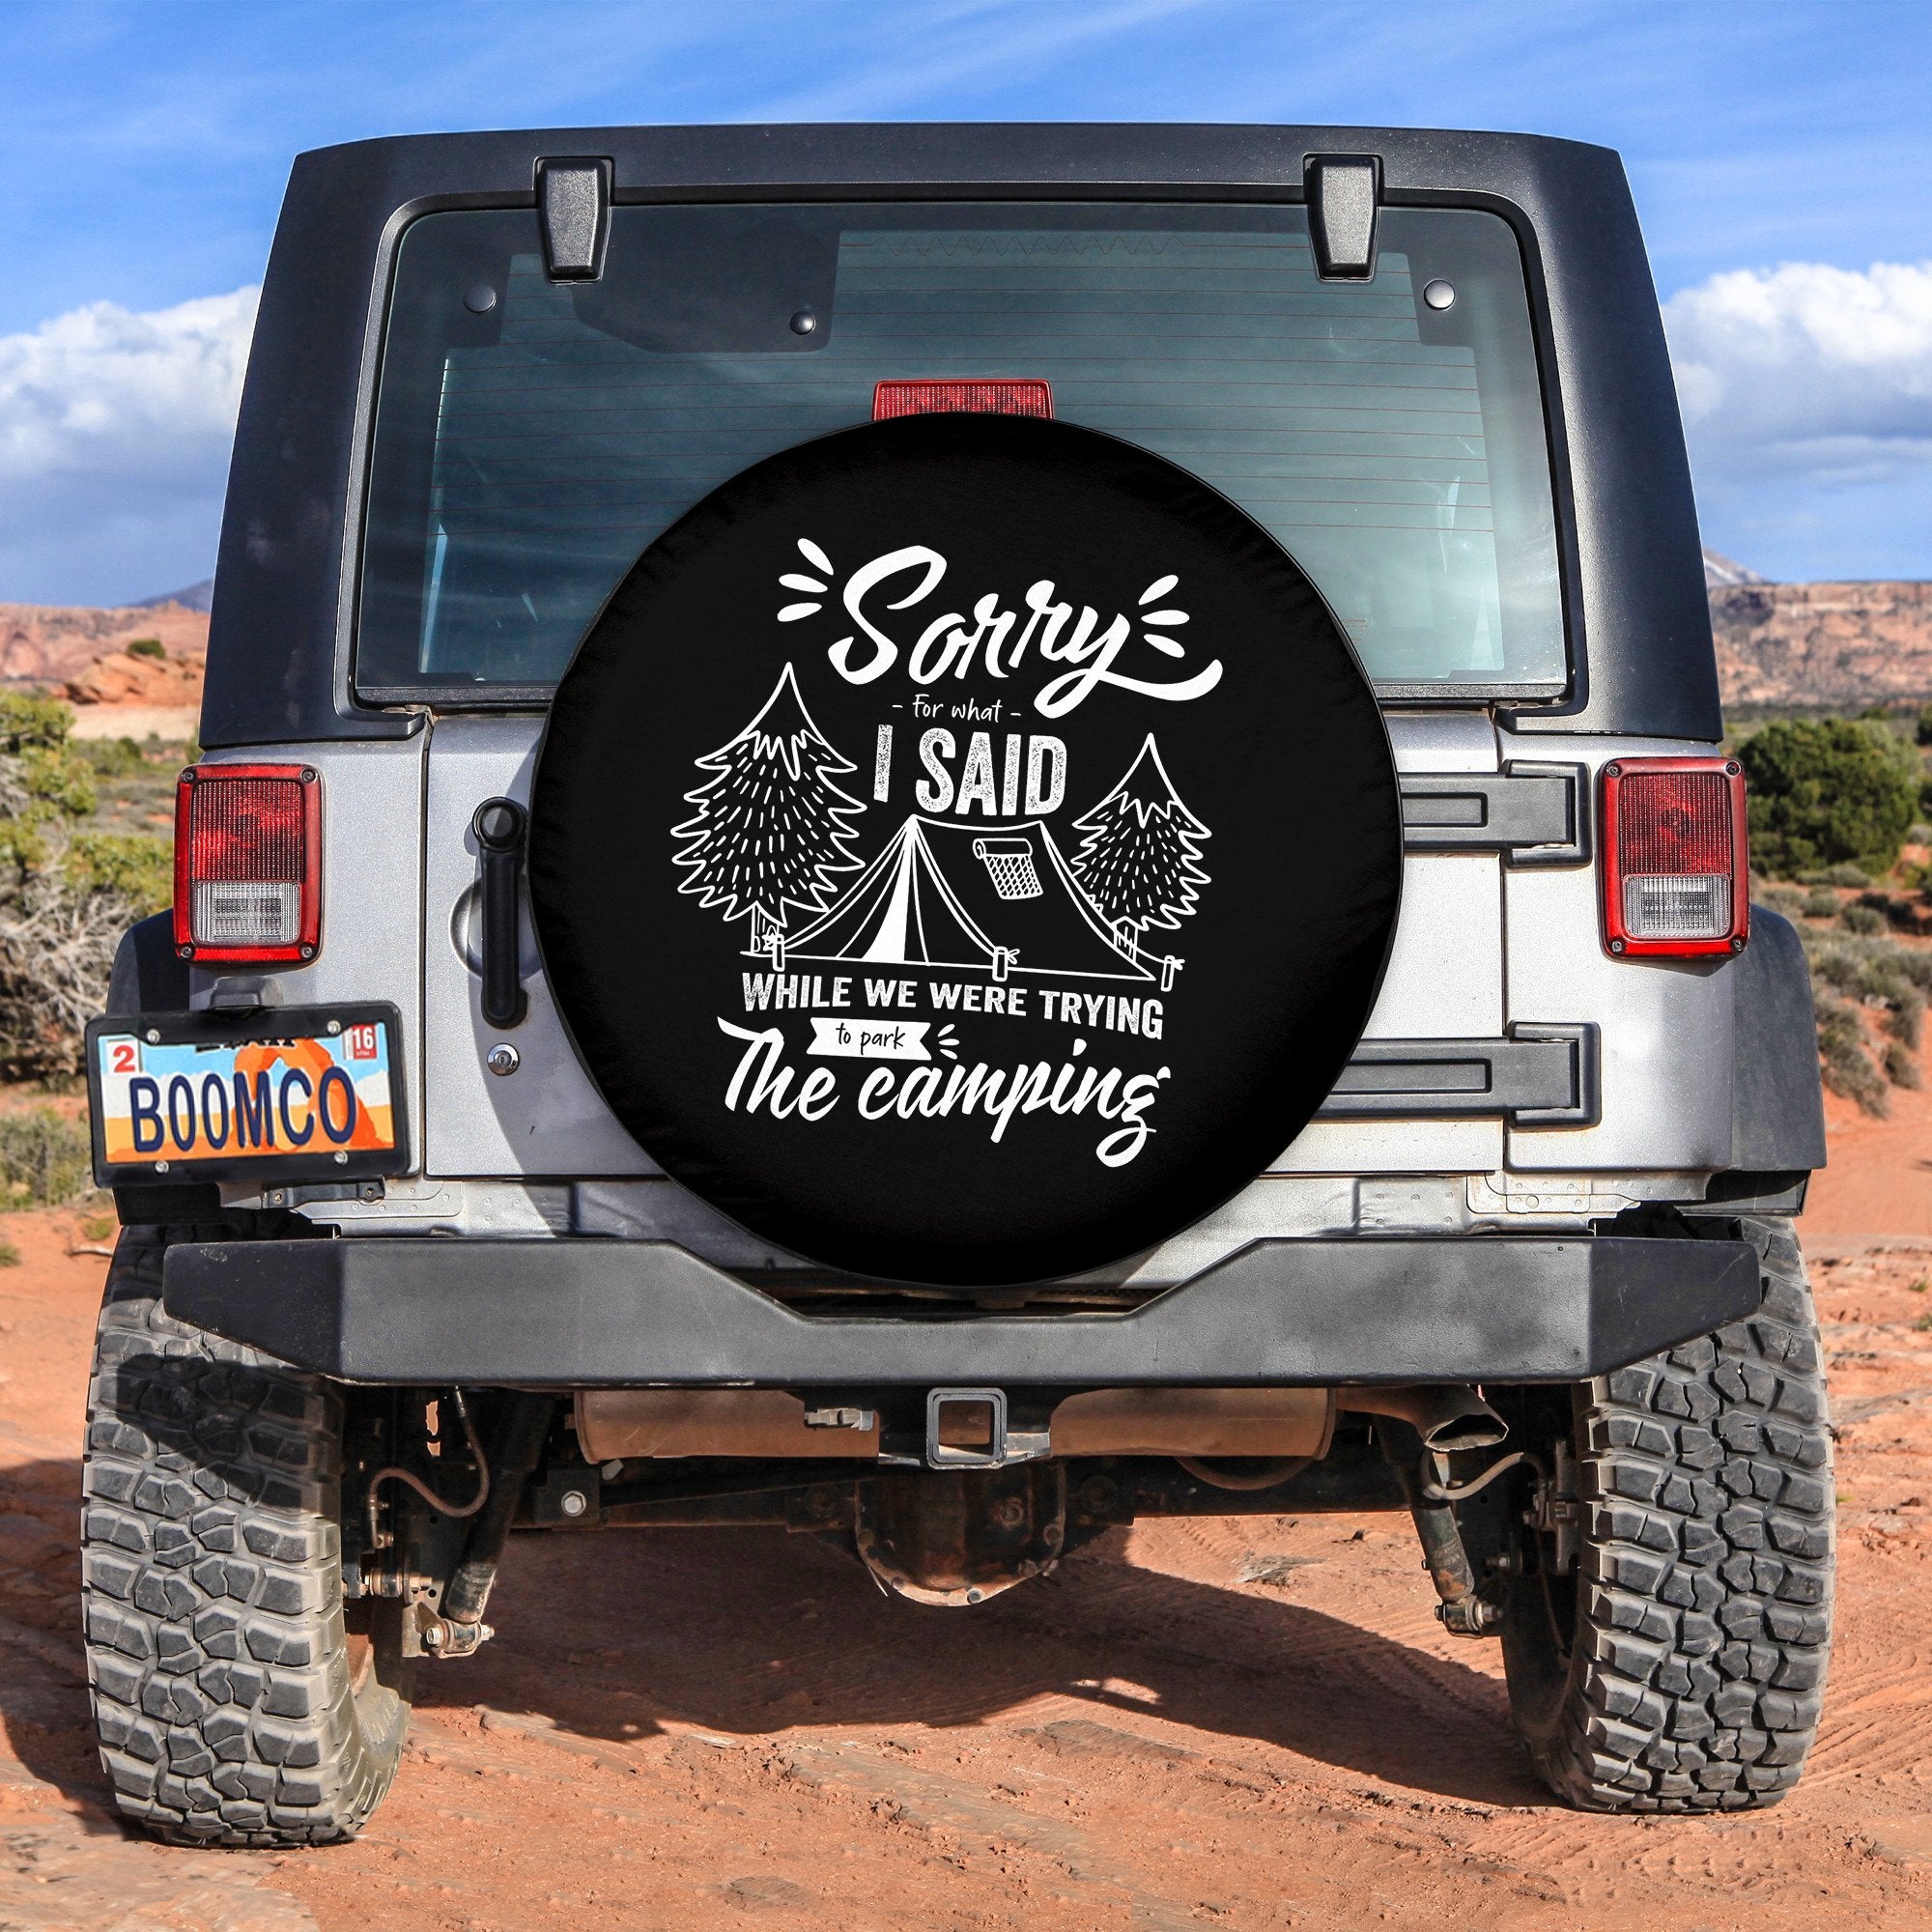 The Camping Spare Tire Cover Gift For Campers